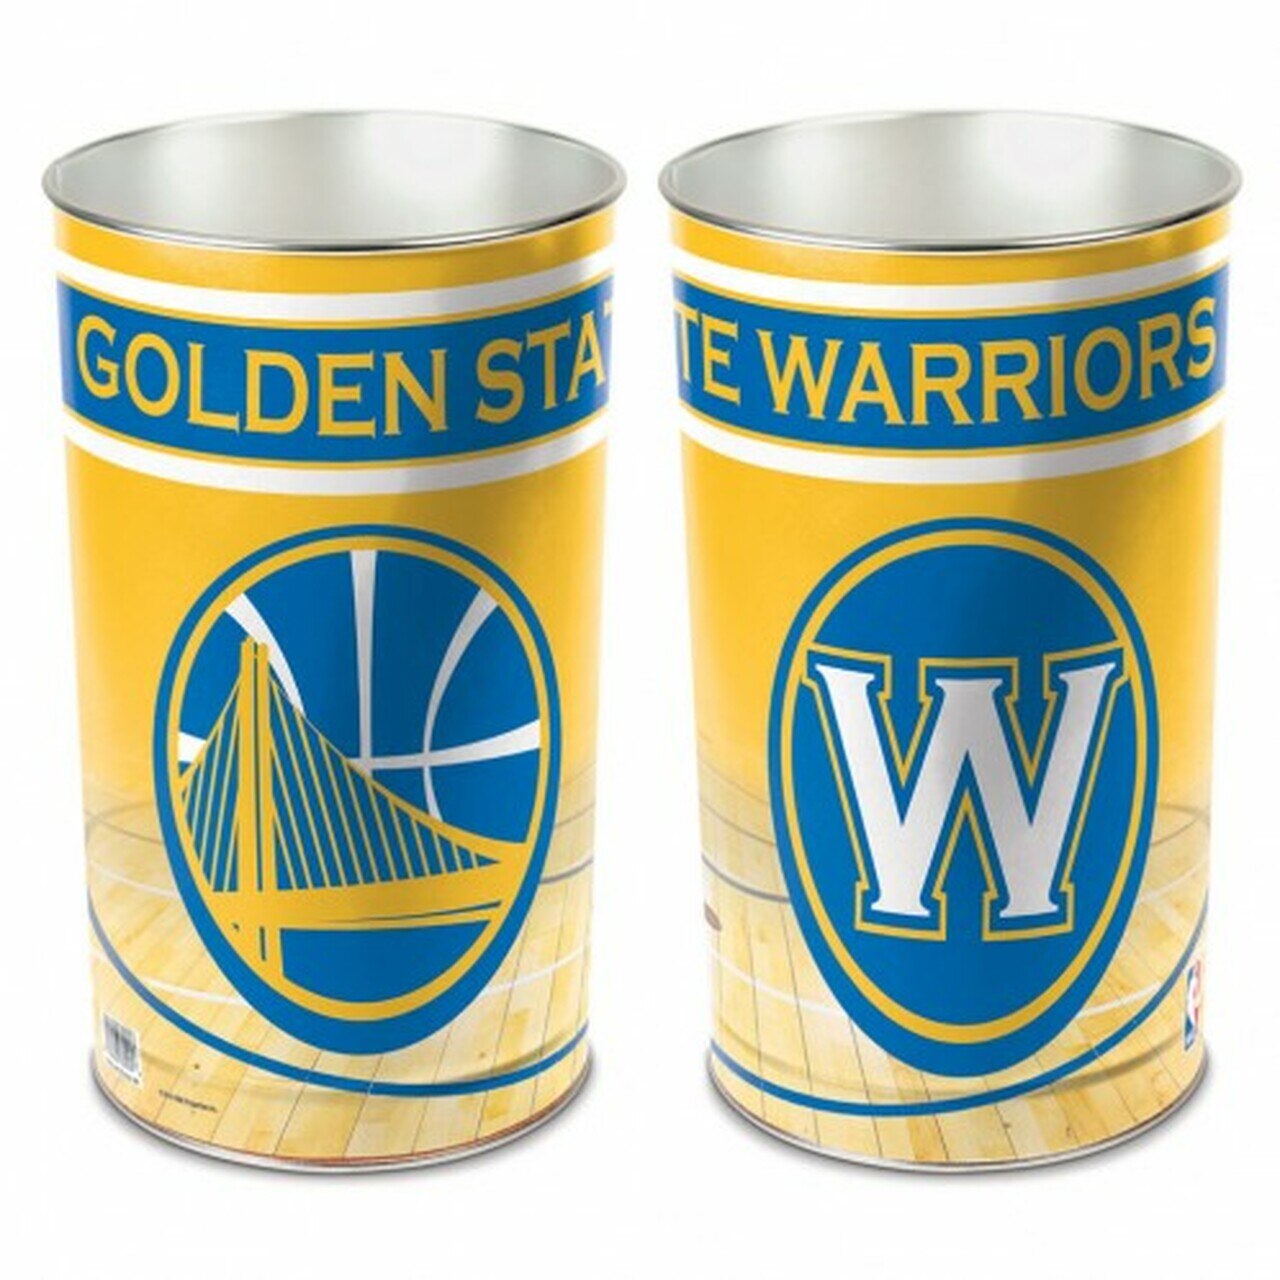 Golden State Warriors metal wastebasket with team colors and graphics measures 15 inches tall & 10 inches wide at top